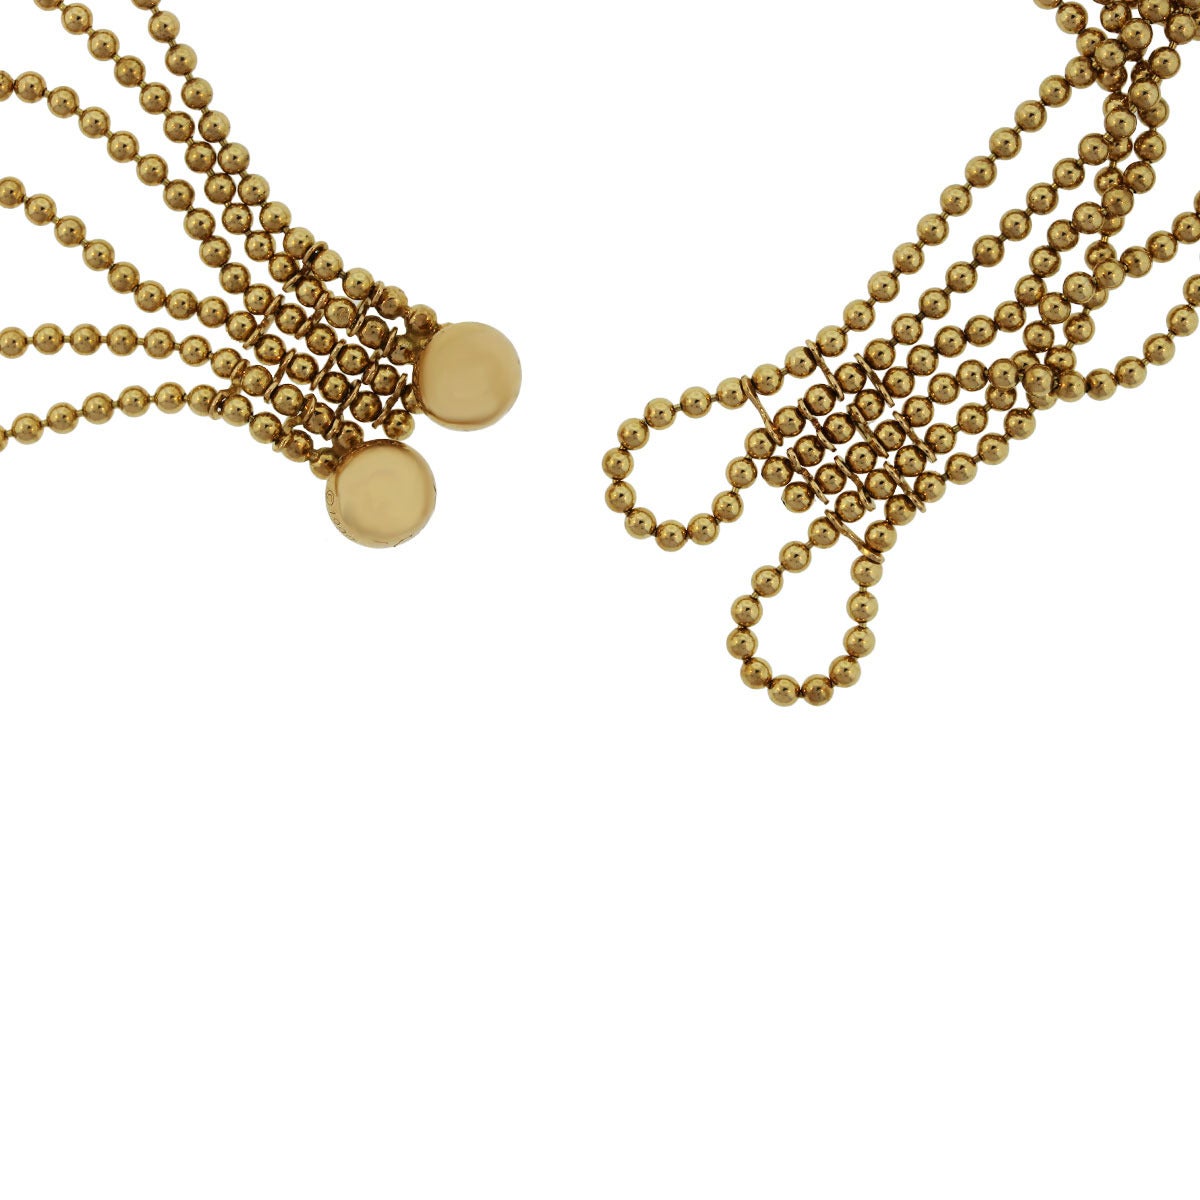 Women's Cartier Yellow Gold Six Strand Necklace